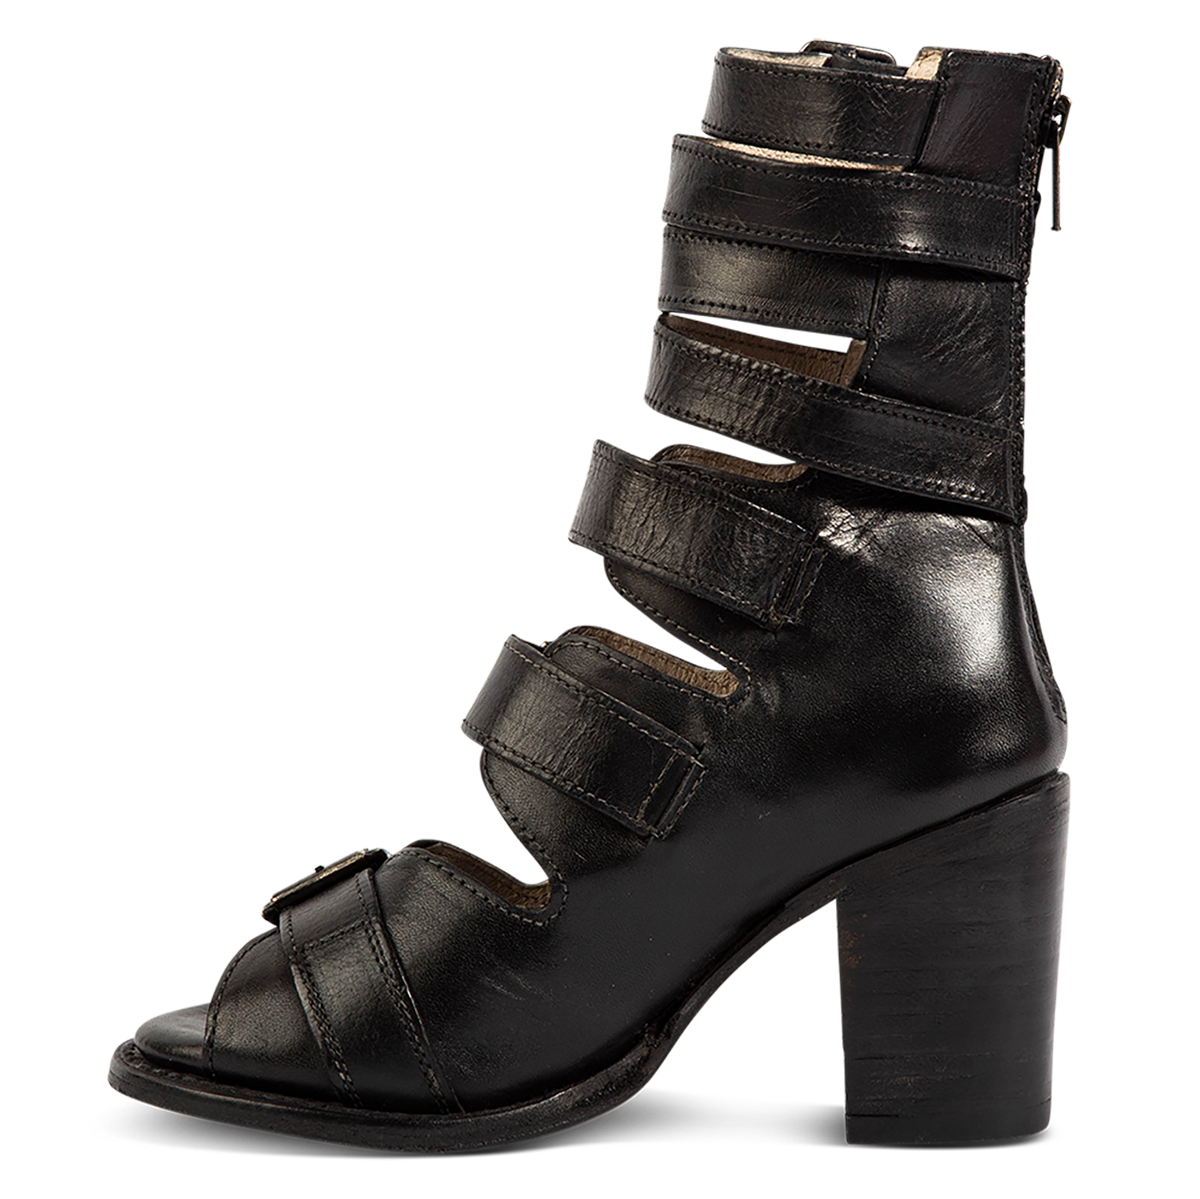 Inside view showing FREEBIRD women's Bond black/black sandal with fashion straps and stacked heel